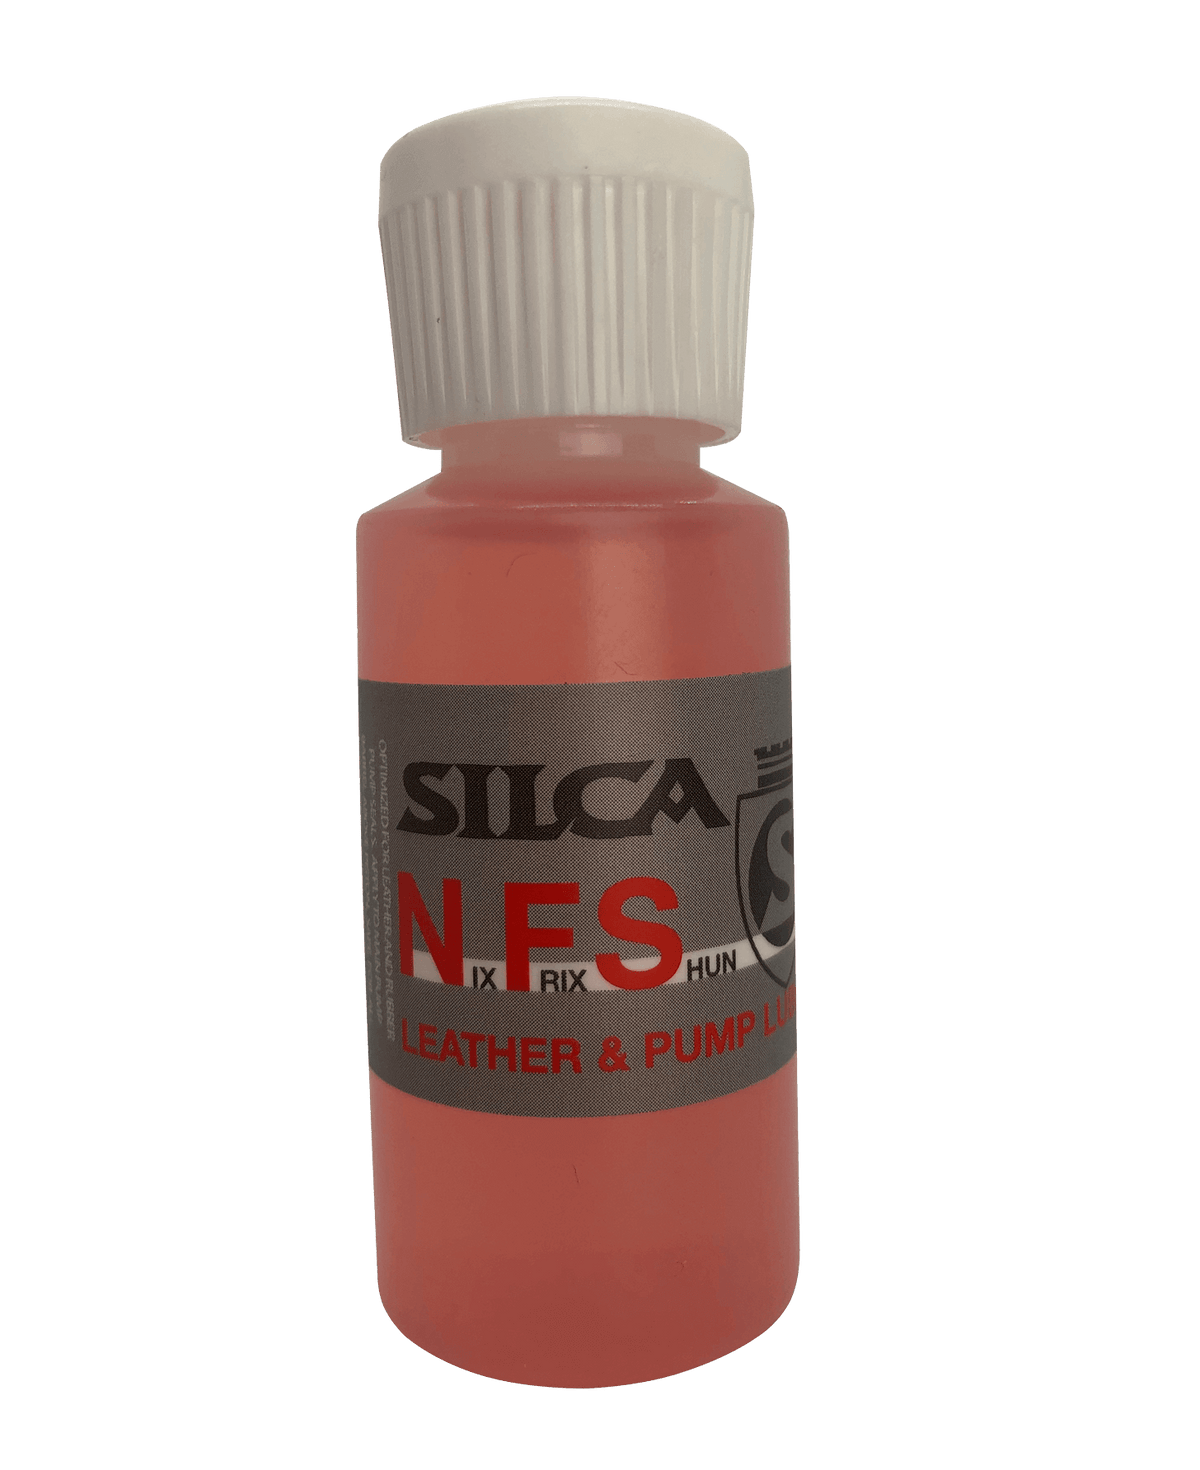 Silca NFS Leather Conditioner 20 mL Bottle